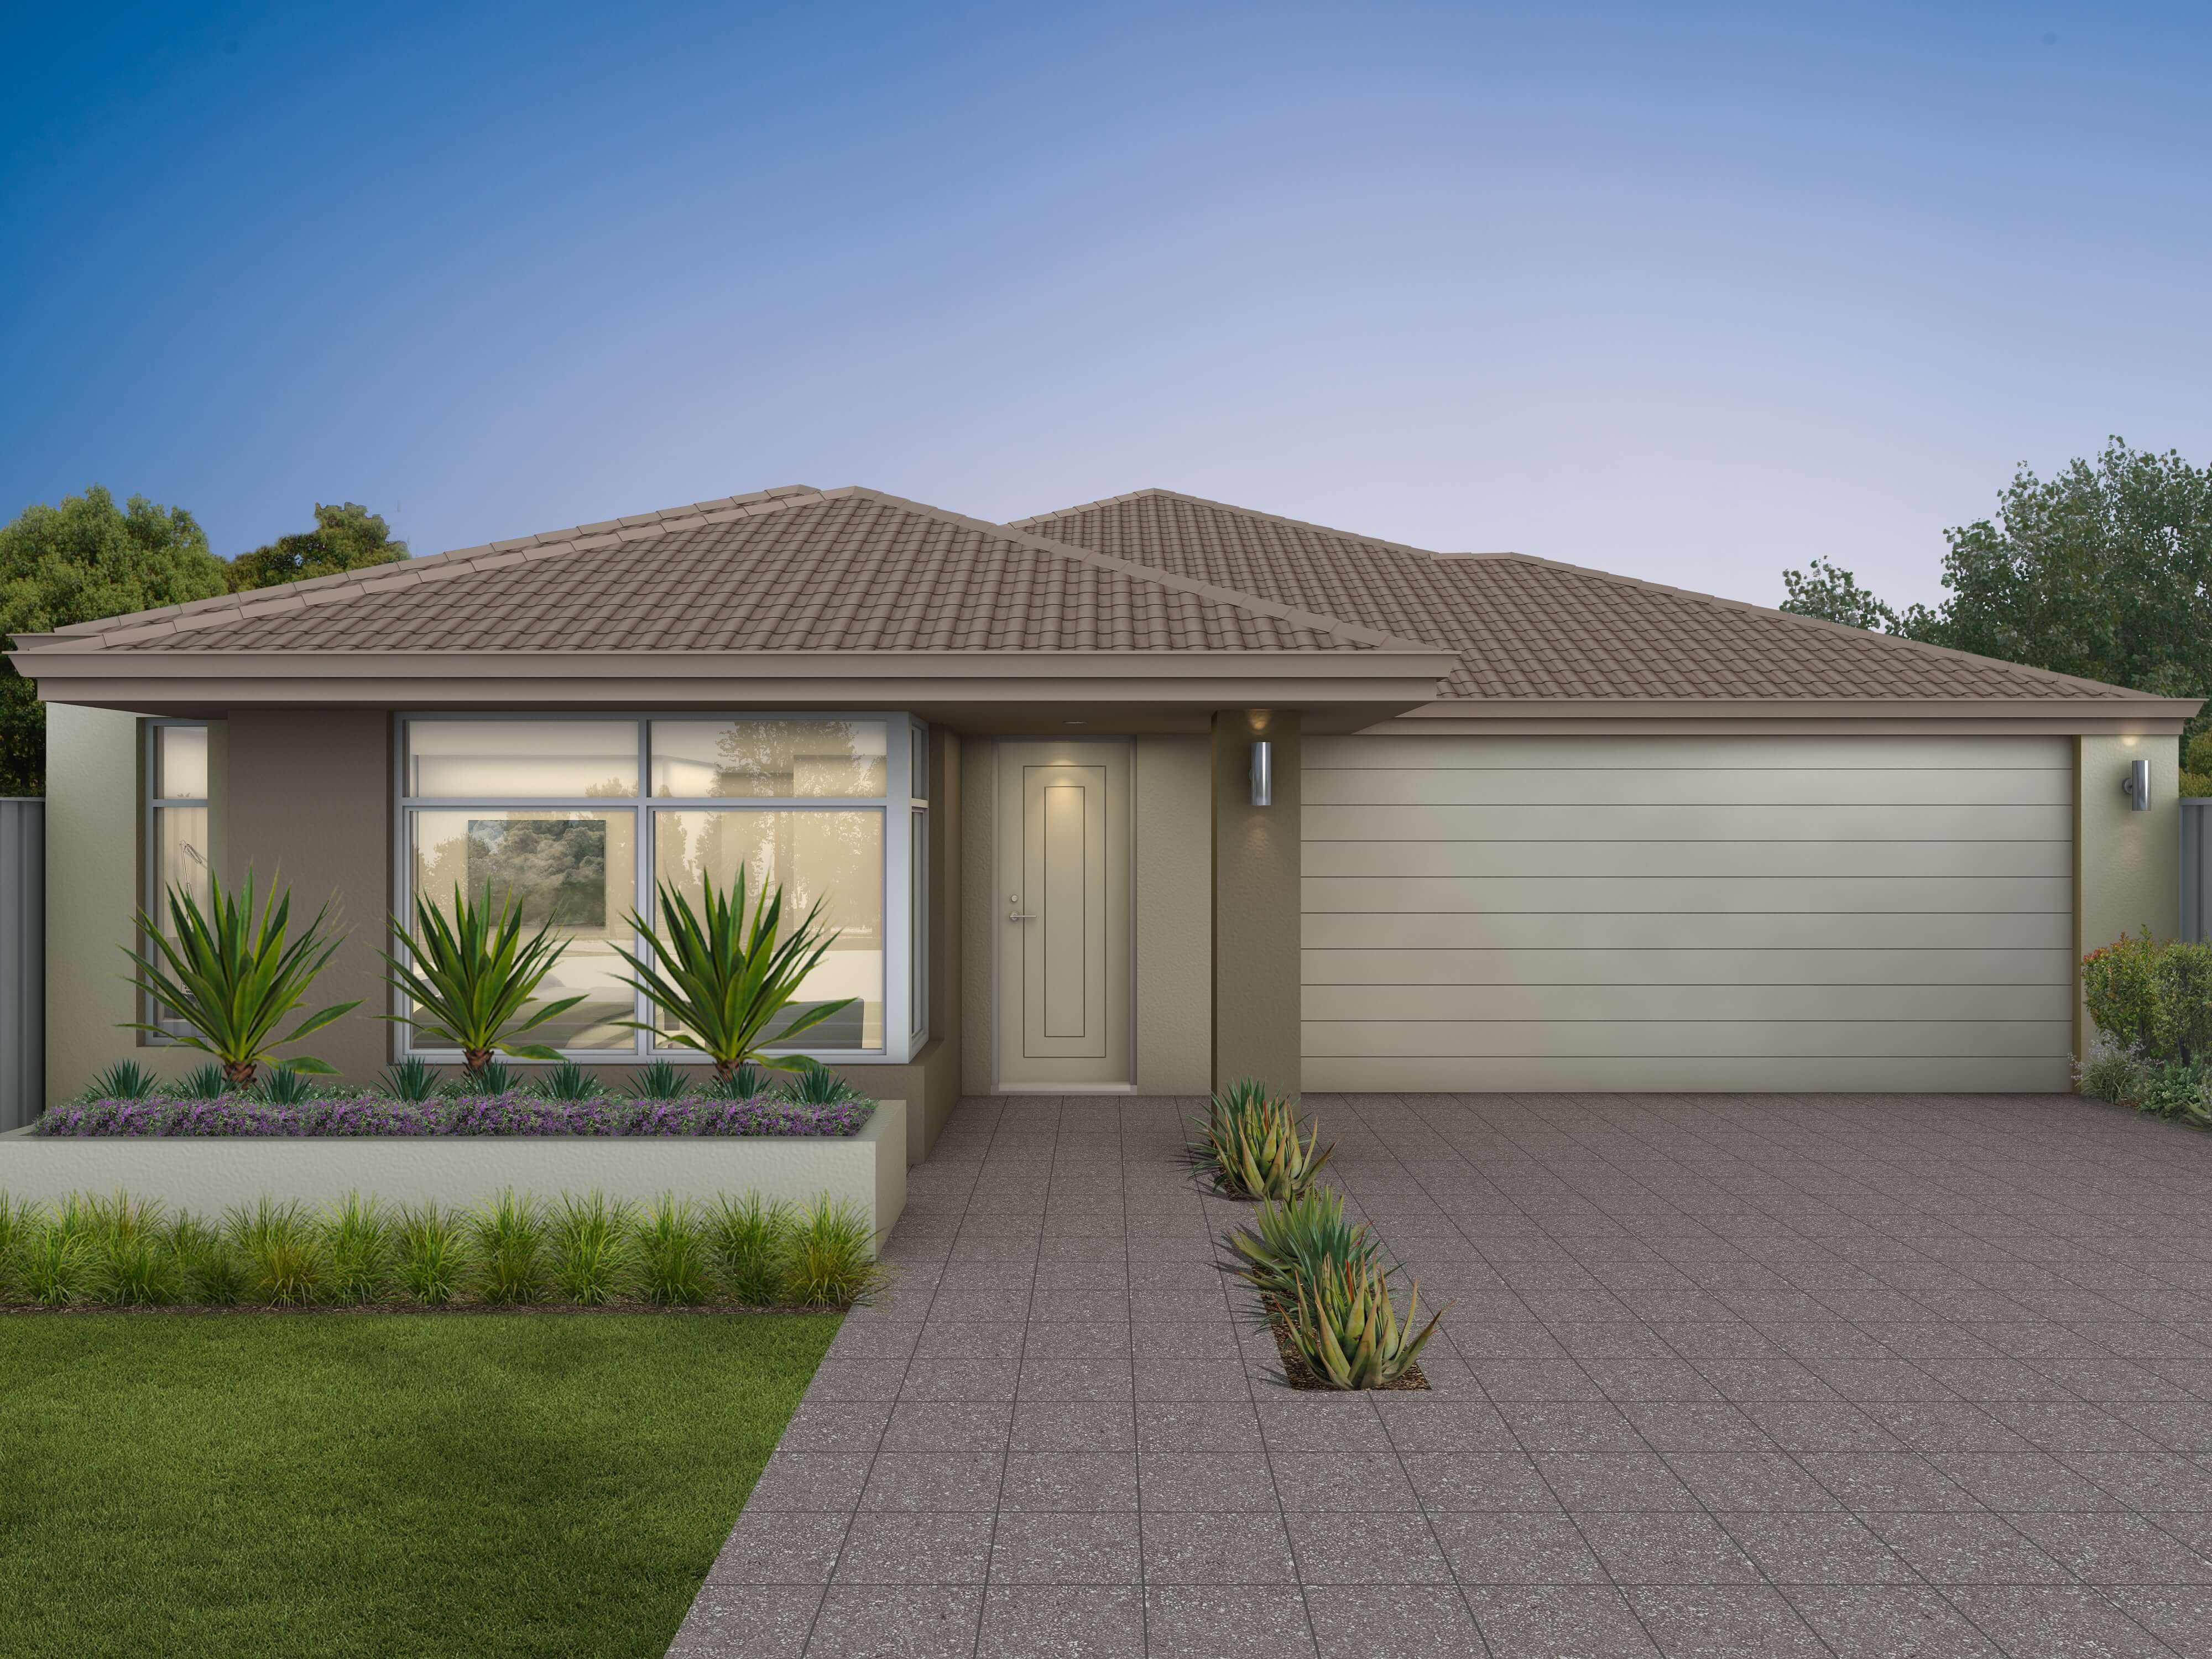 The Padbury, a new home design by Move Homes for Perth families and first time home buyers